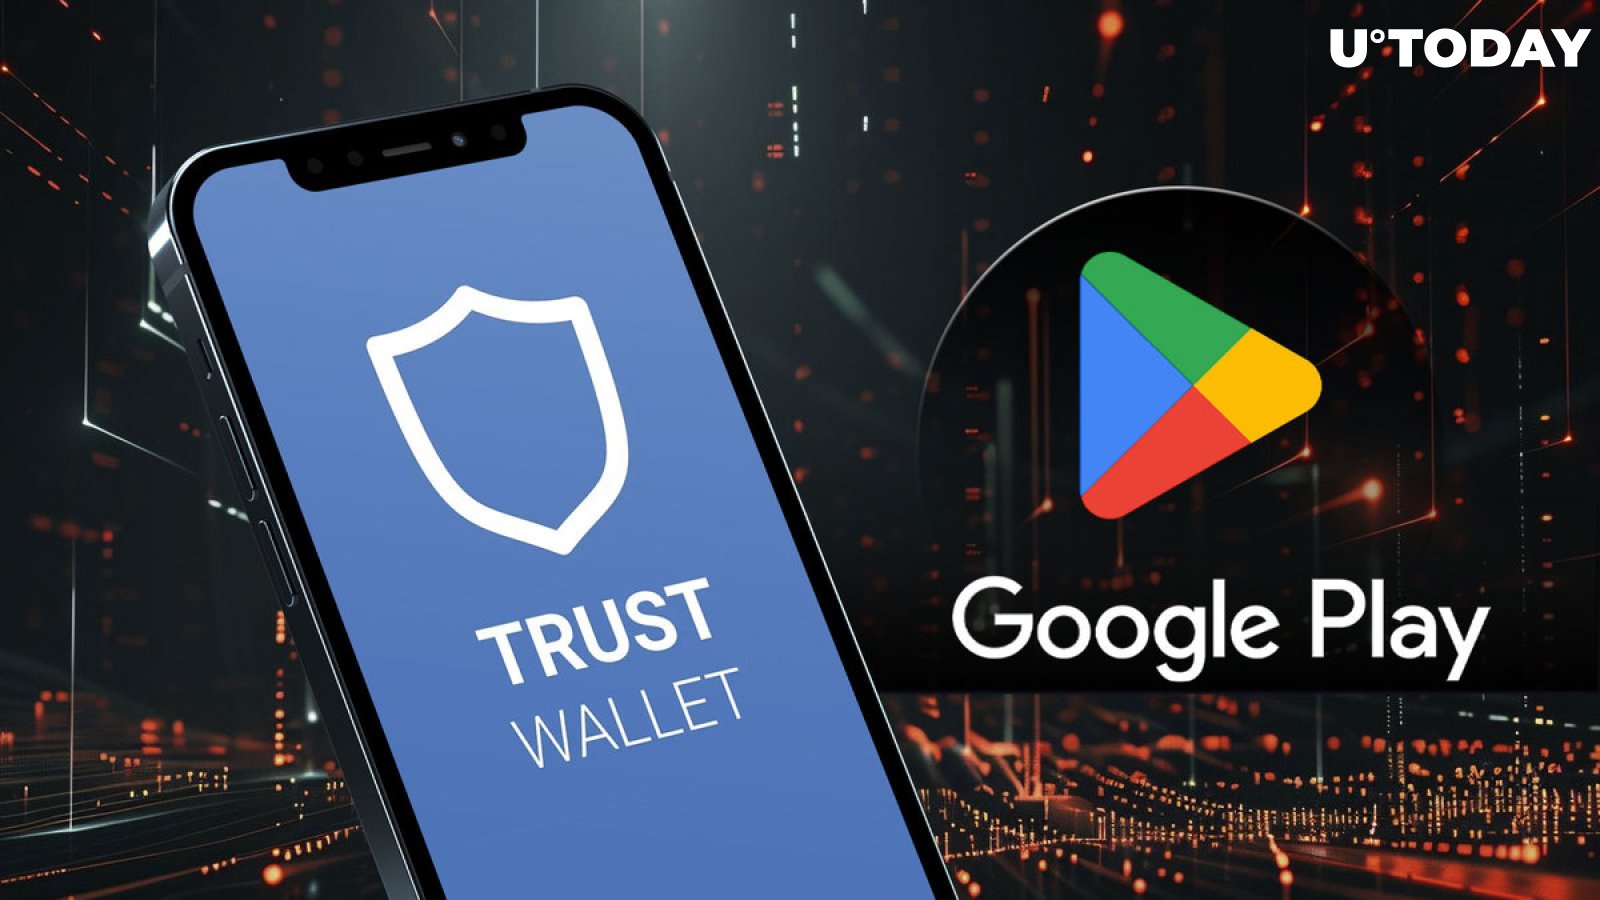 Trust Wallet Temporarily Ousted From Google Play Store